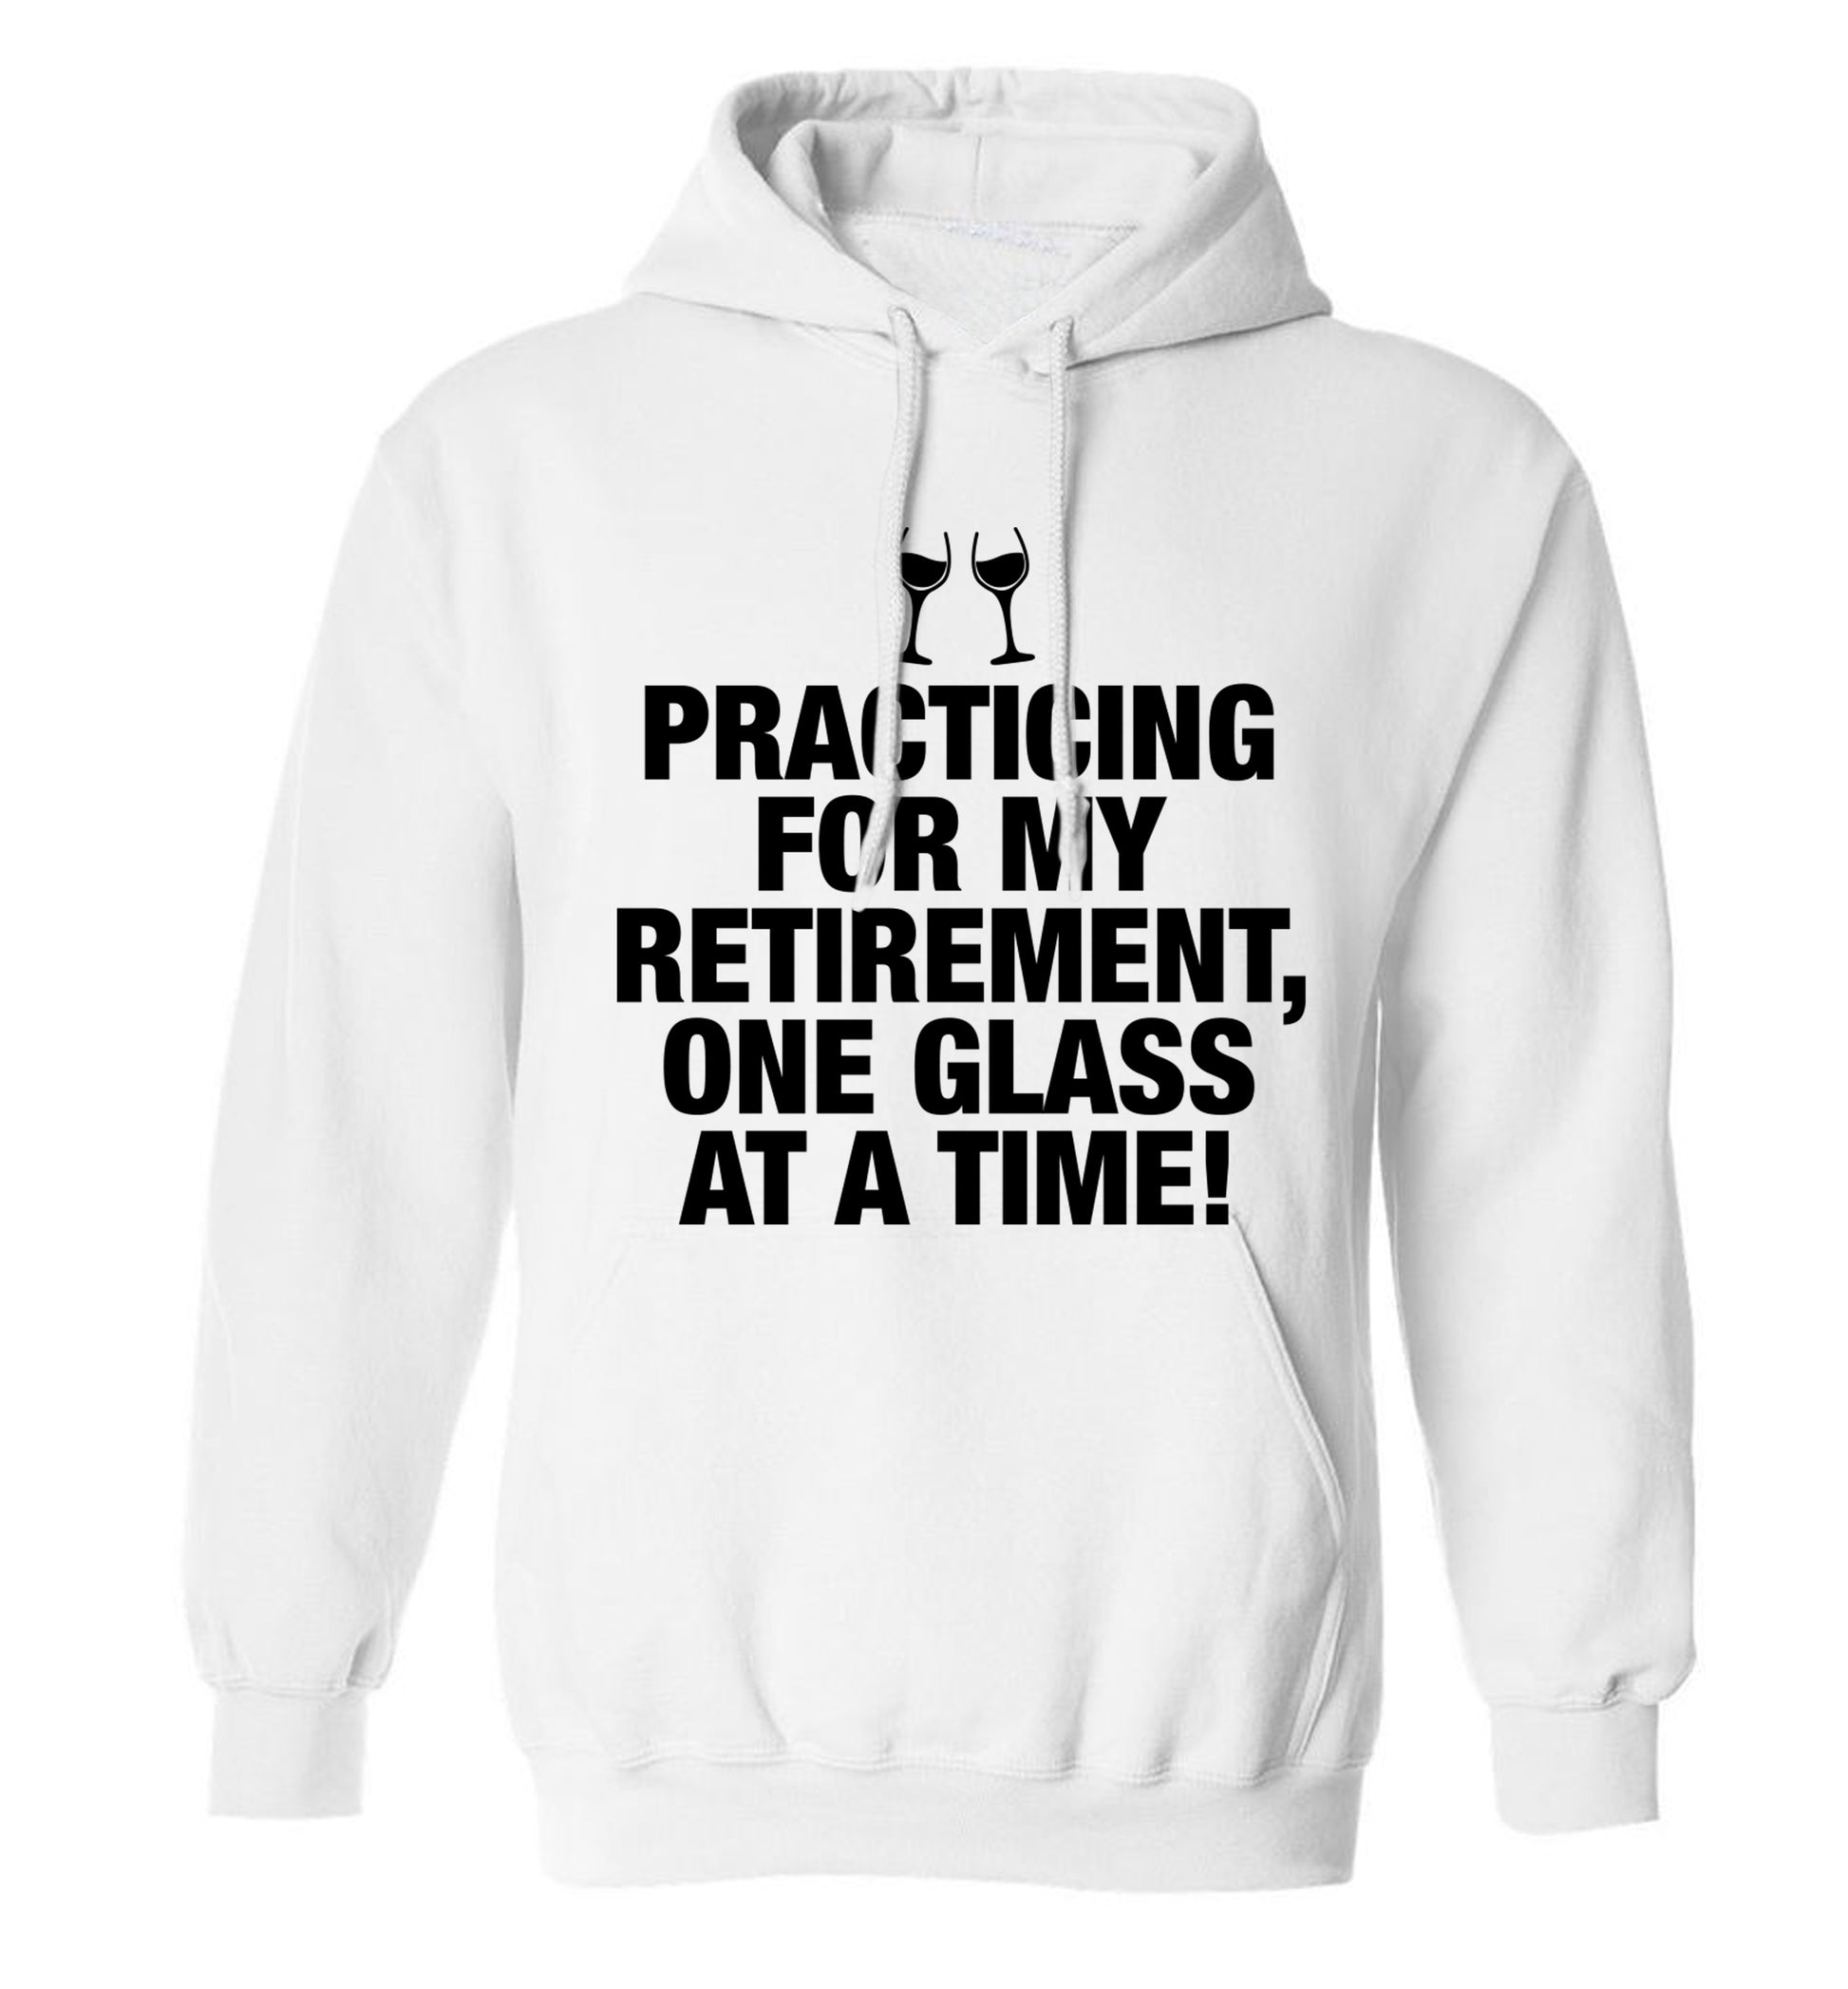 Practicing my retirement one glass at a time adults unisex white hoodie 2XL